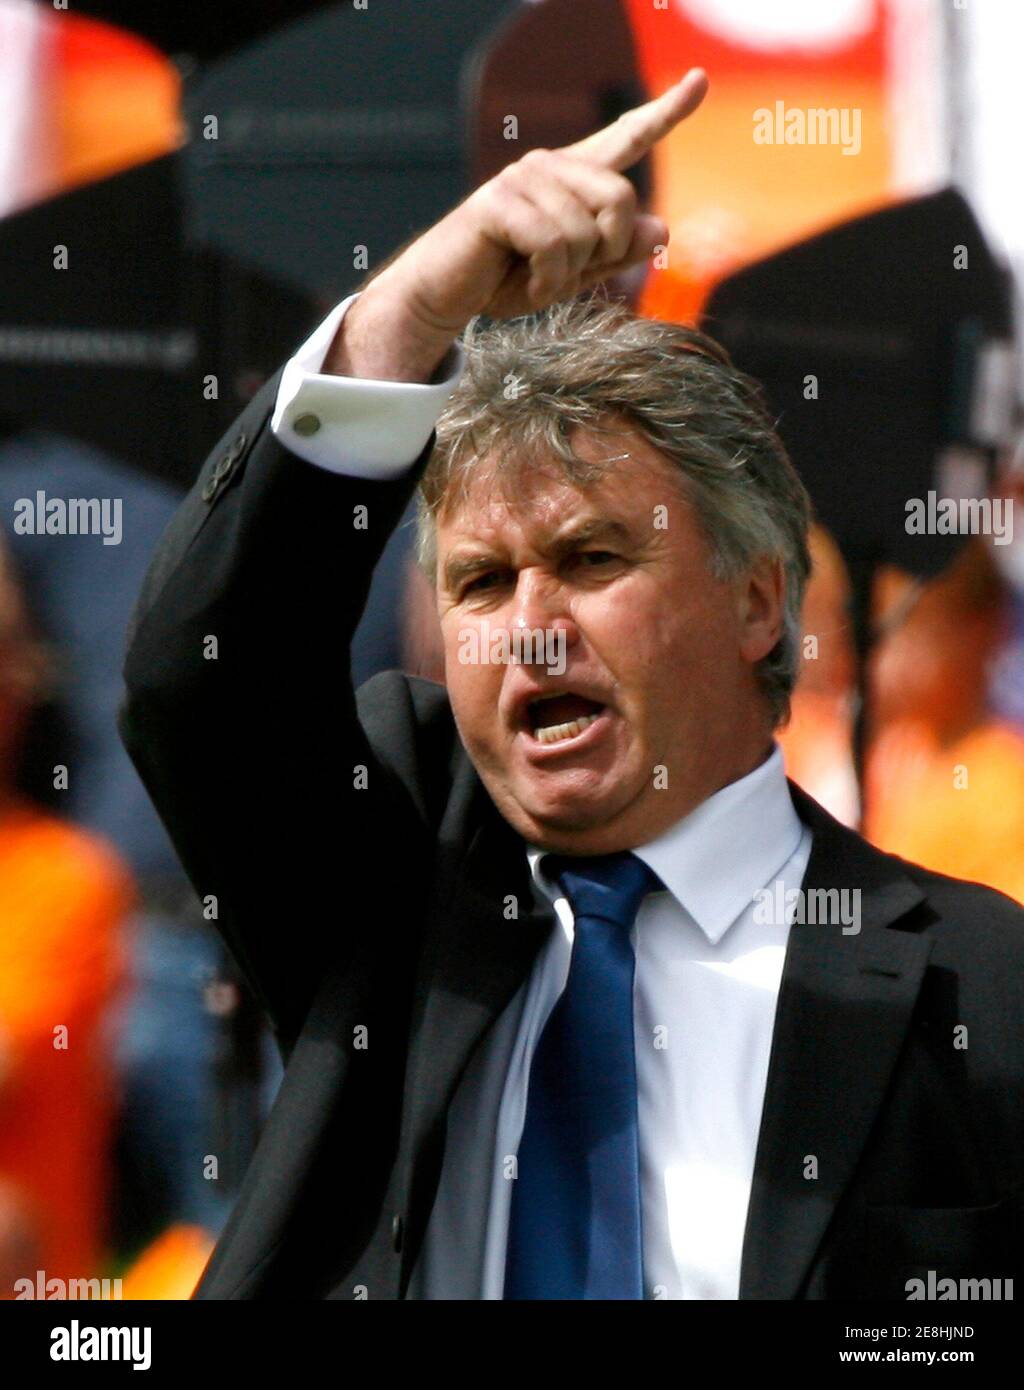 Australia's Dutch-born coach Guus Hiddink gestures during the international friendly soccer match against the Netherlands in Rotterdam, the Netherlands June 4, 2006.   WORLD CUP 2006 PREVIEW       REUTERS/Jerry Lampen   (NETHERLANDS) Stock Photo